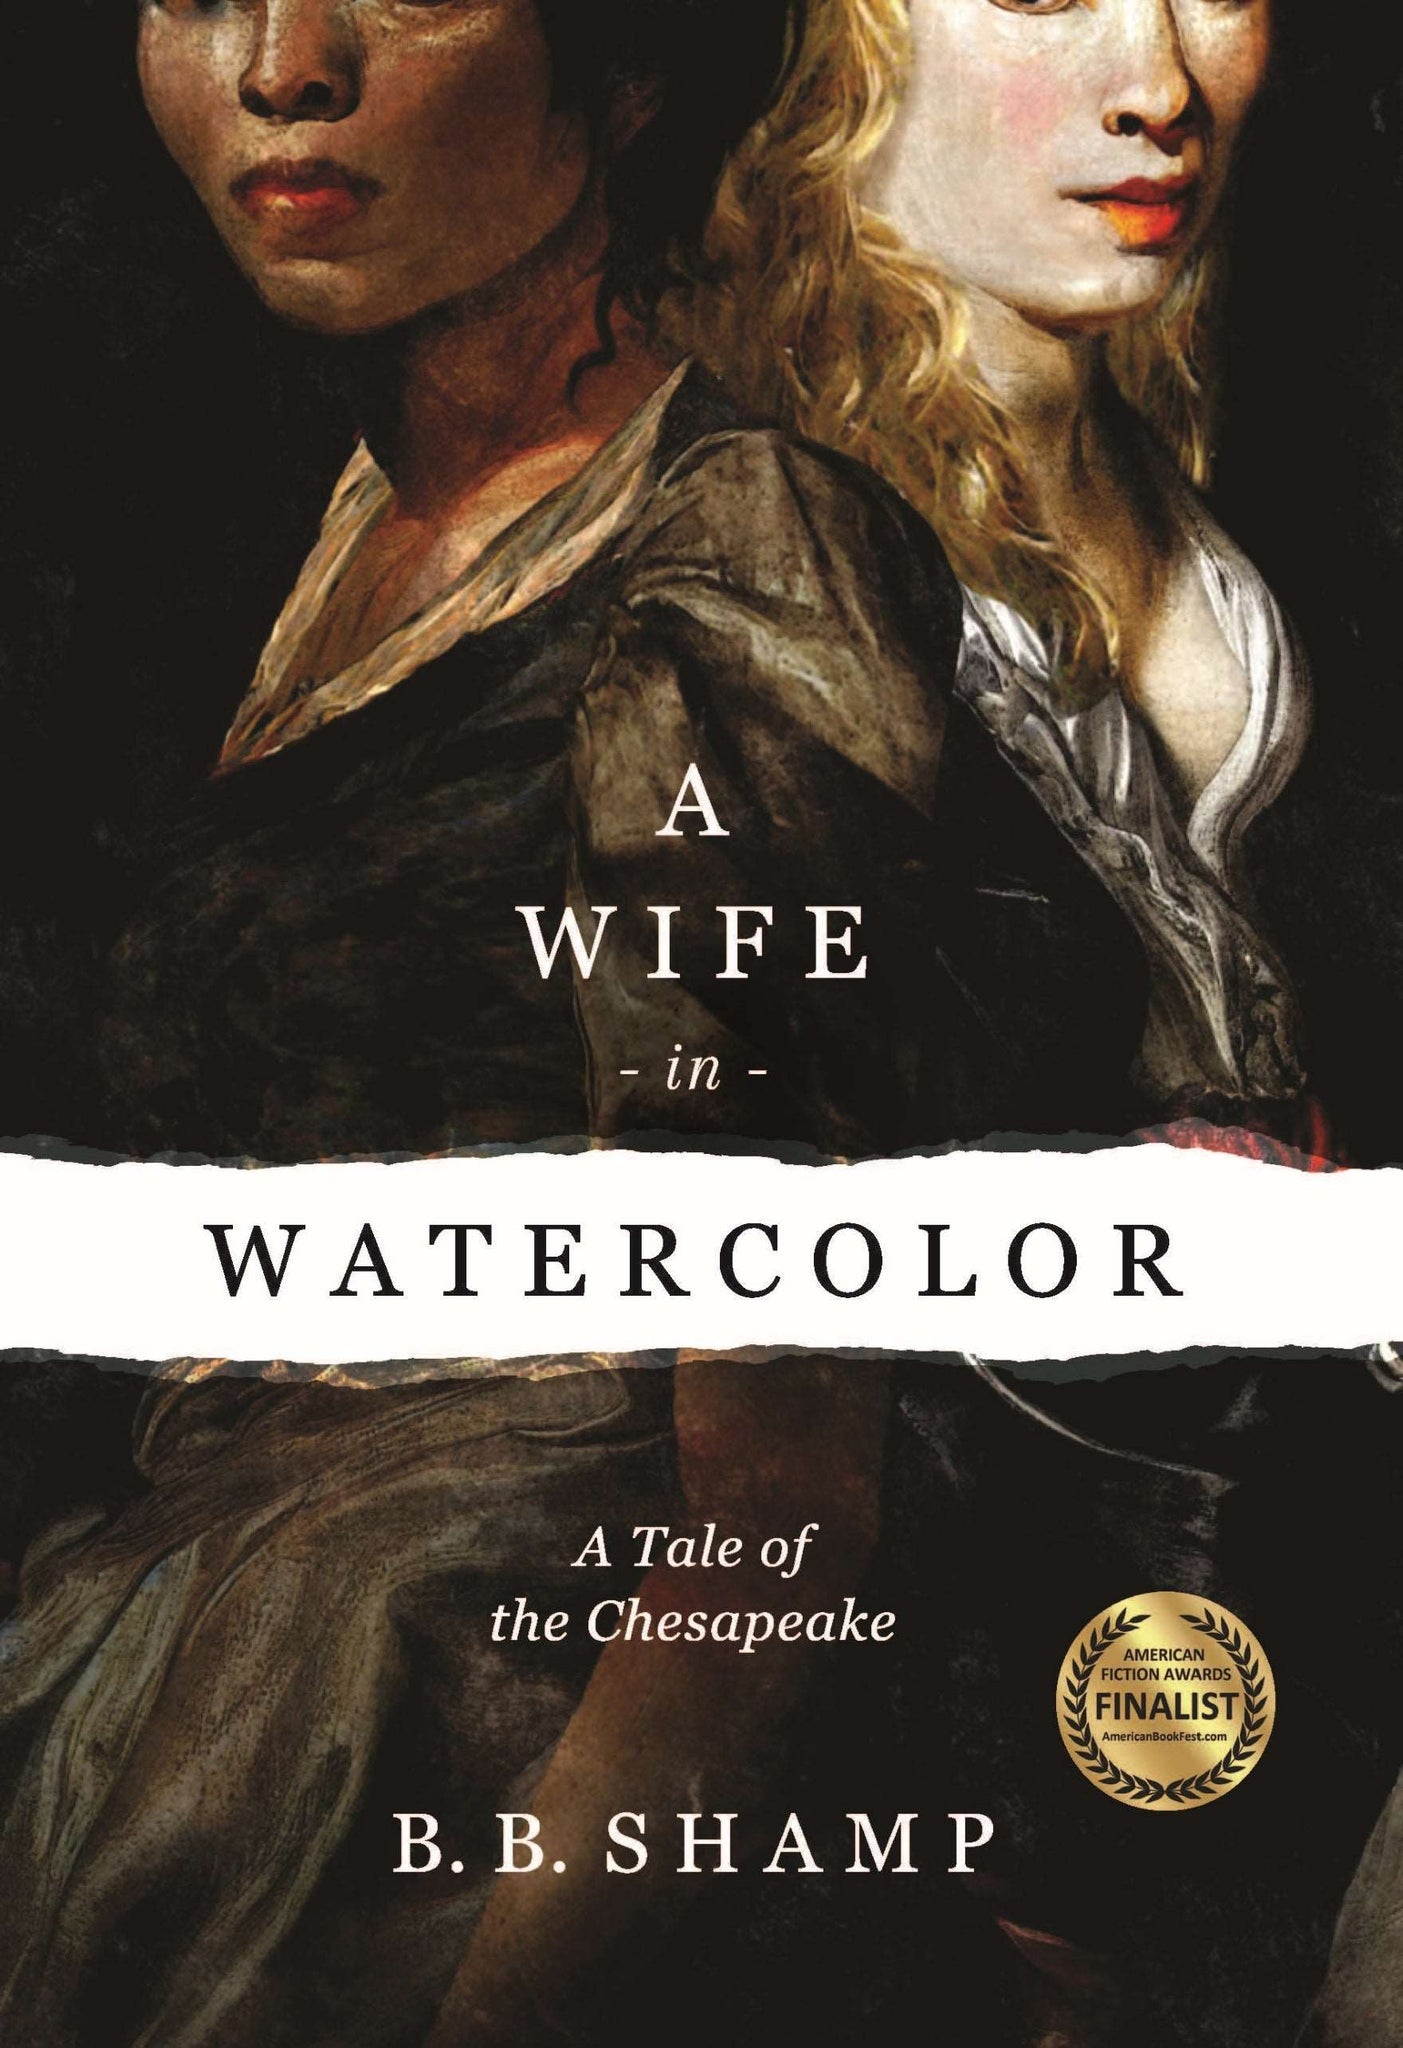 A Wife in Watercolor: A Tale of the Chesapeake